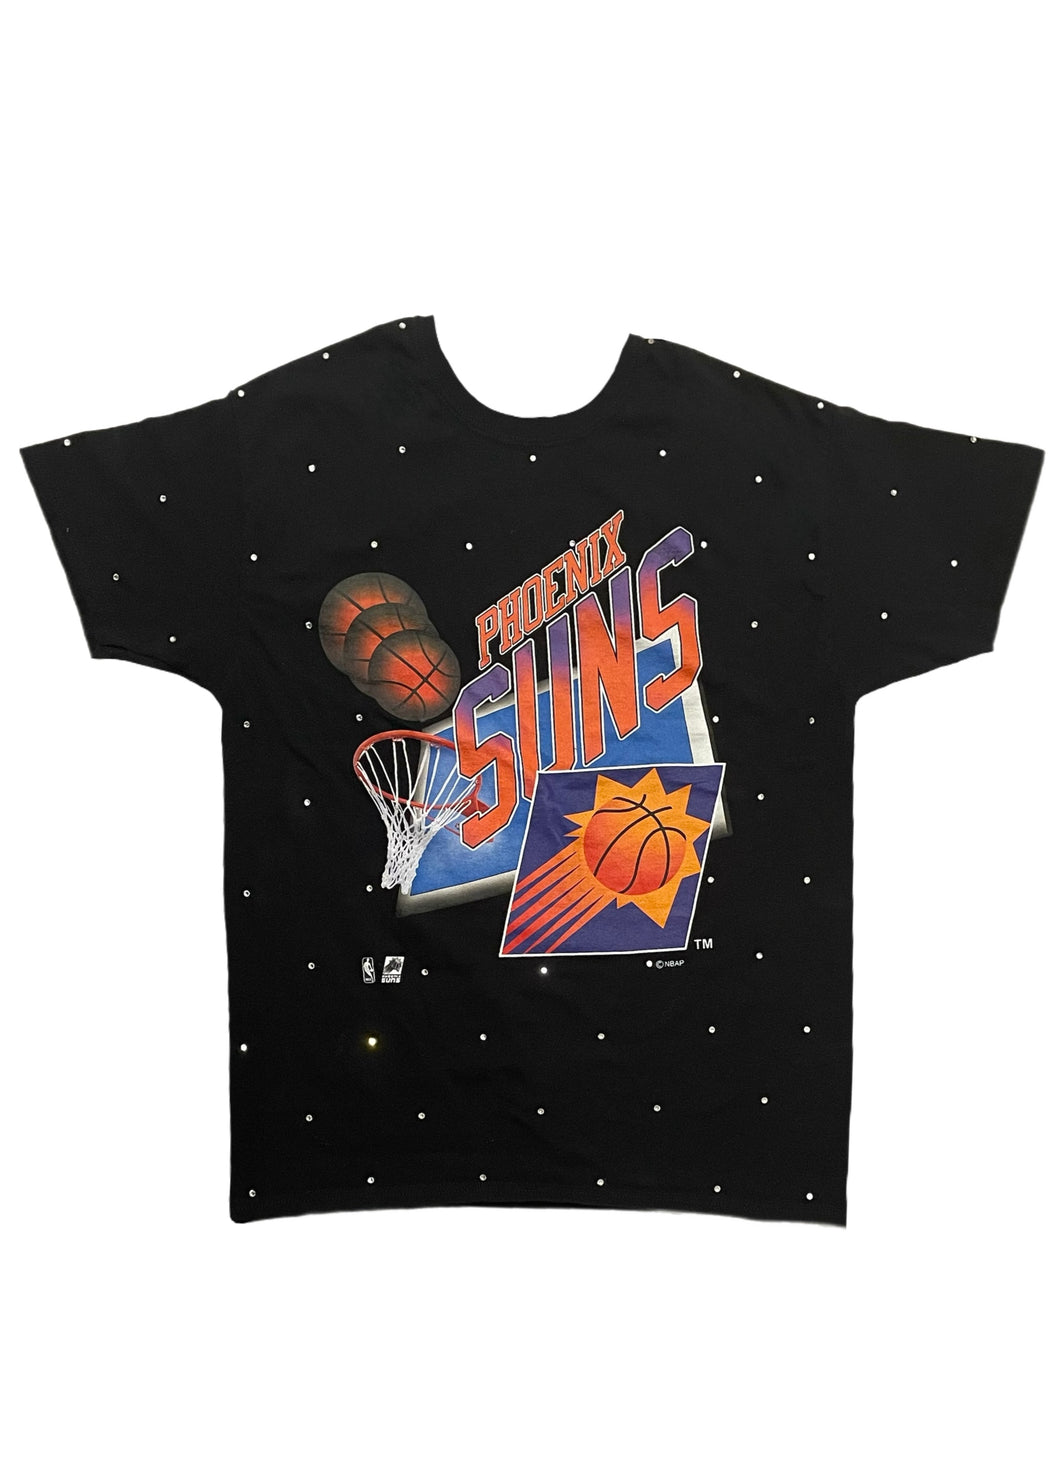 Pheonix Suns, Basketball One of a KIND Vintage Tee with Overall Crystal Design